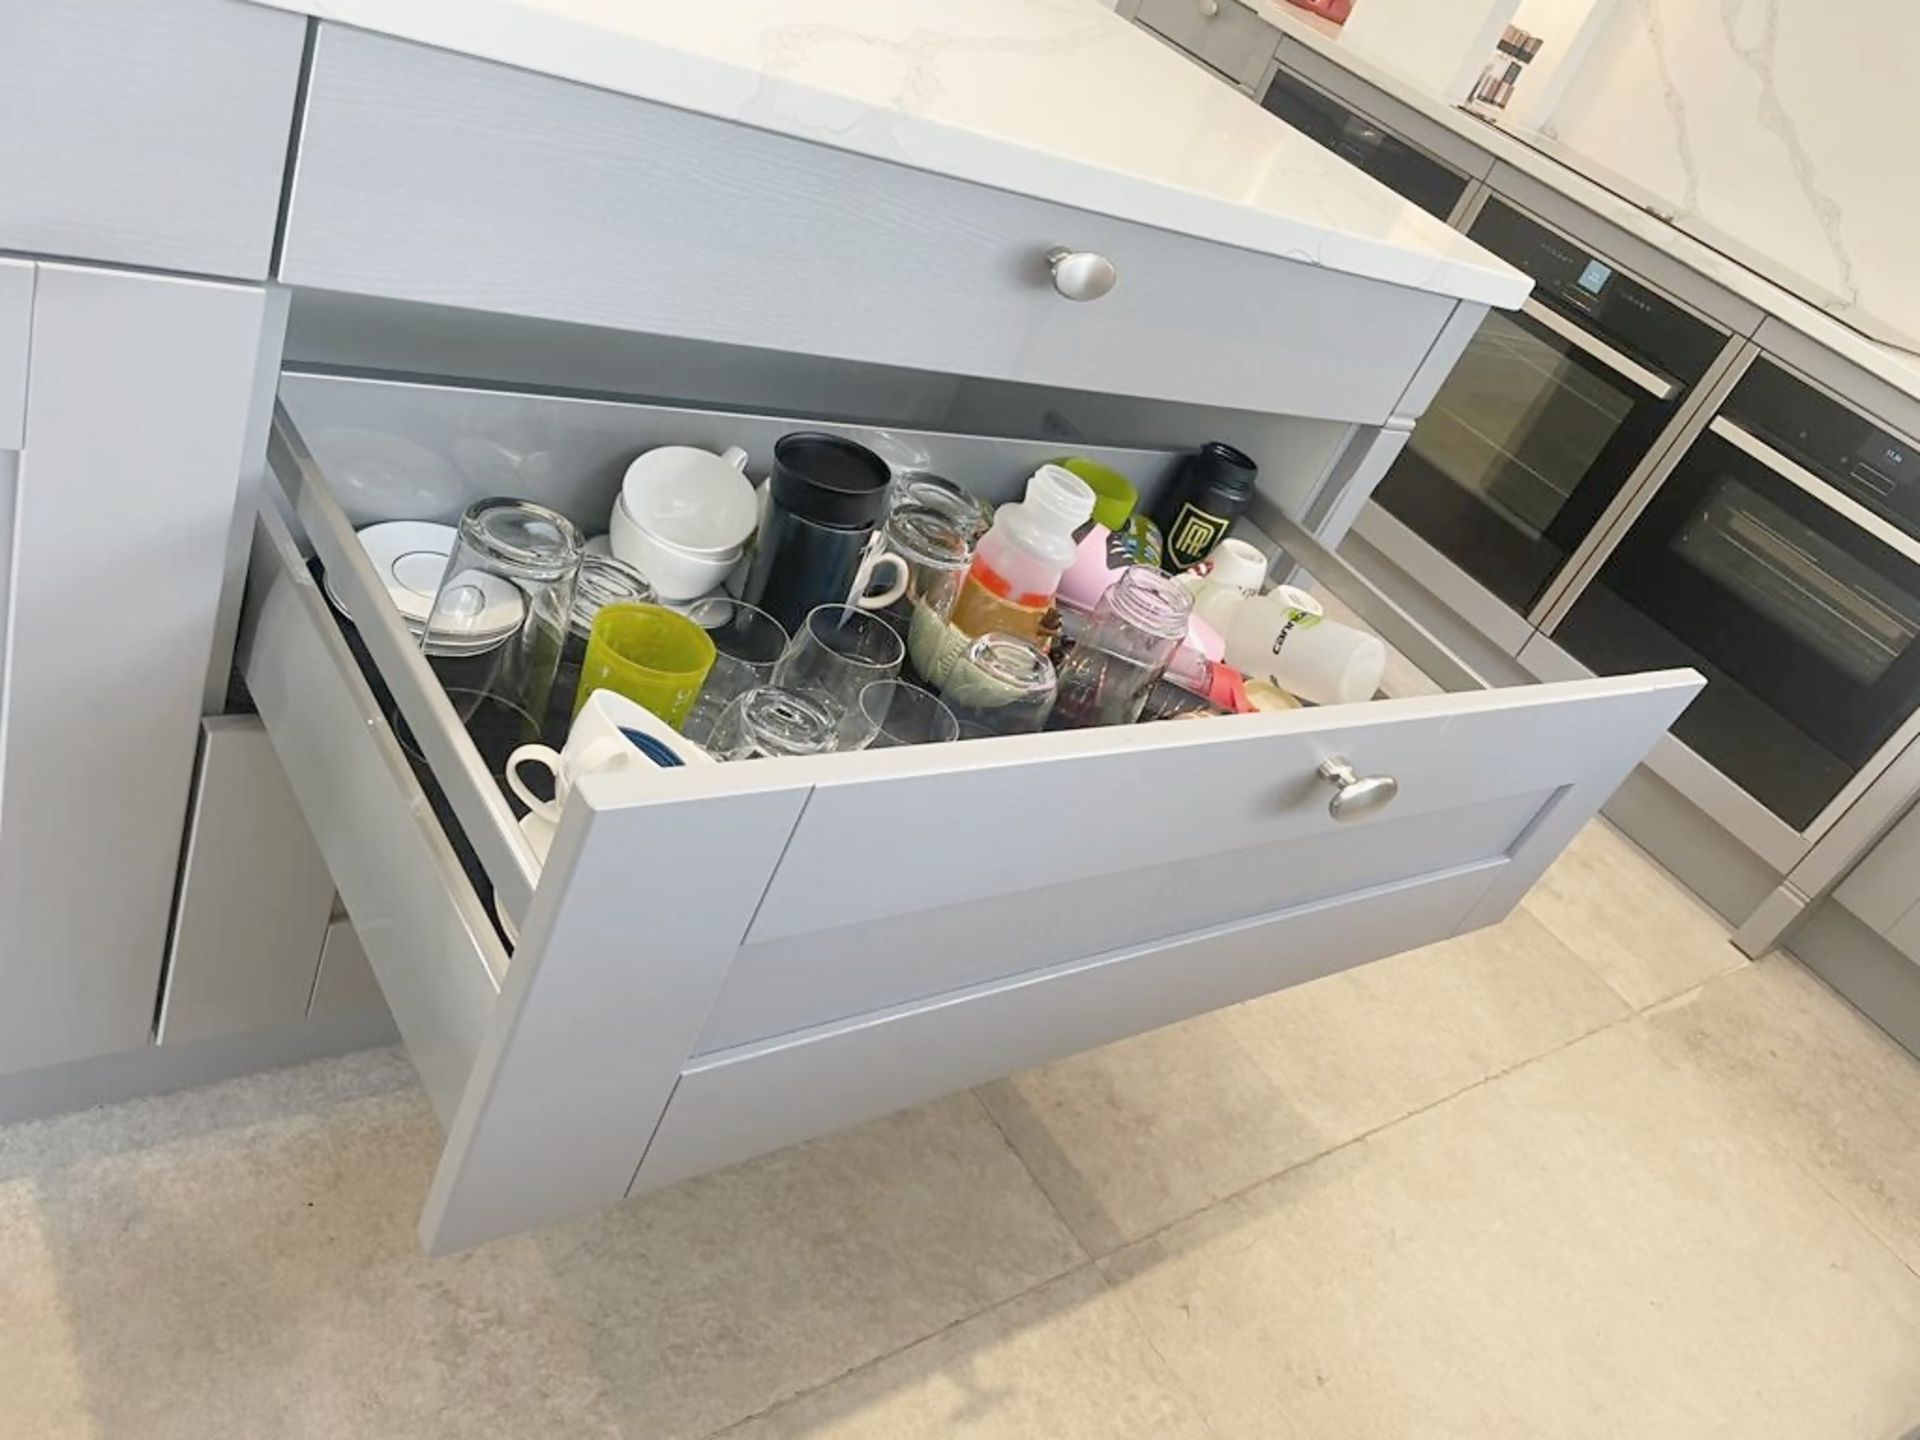 1 x SIEMATIC Bespoke Shaker-style Fitted Kitchen, Utility Room, Appliances & Modern Quartz Surfaces - Image 35 of 153